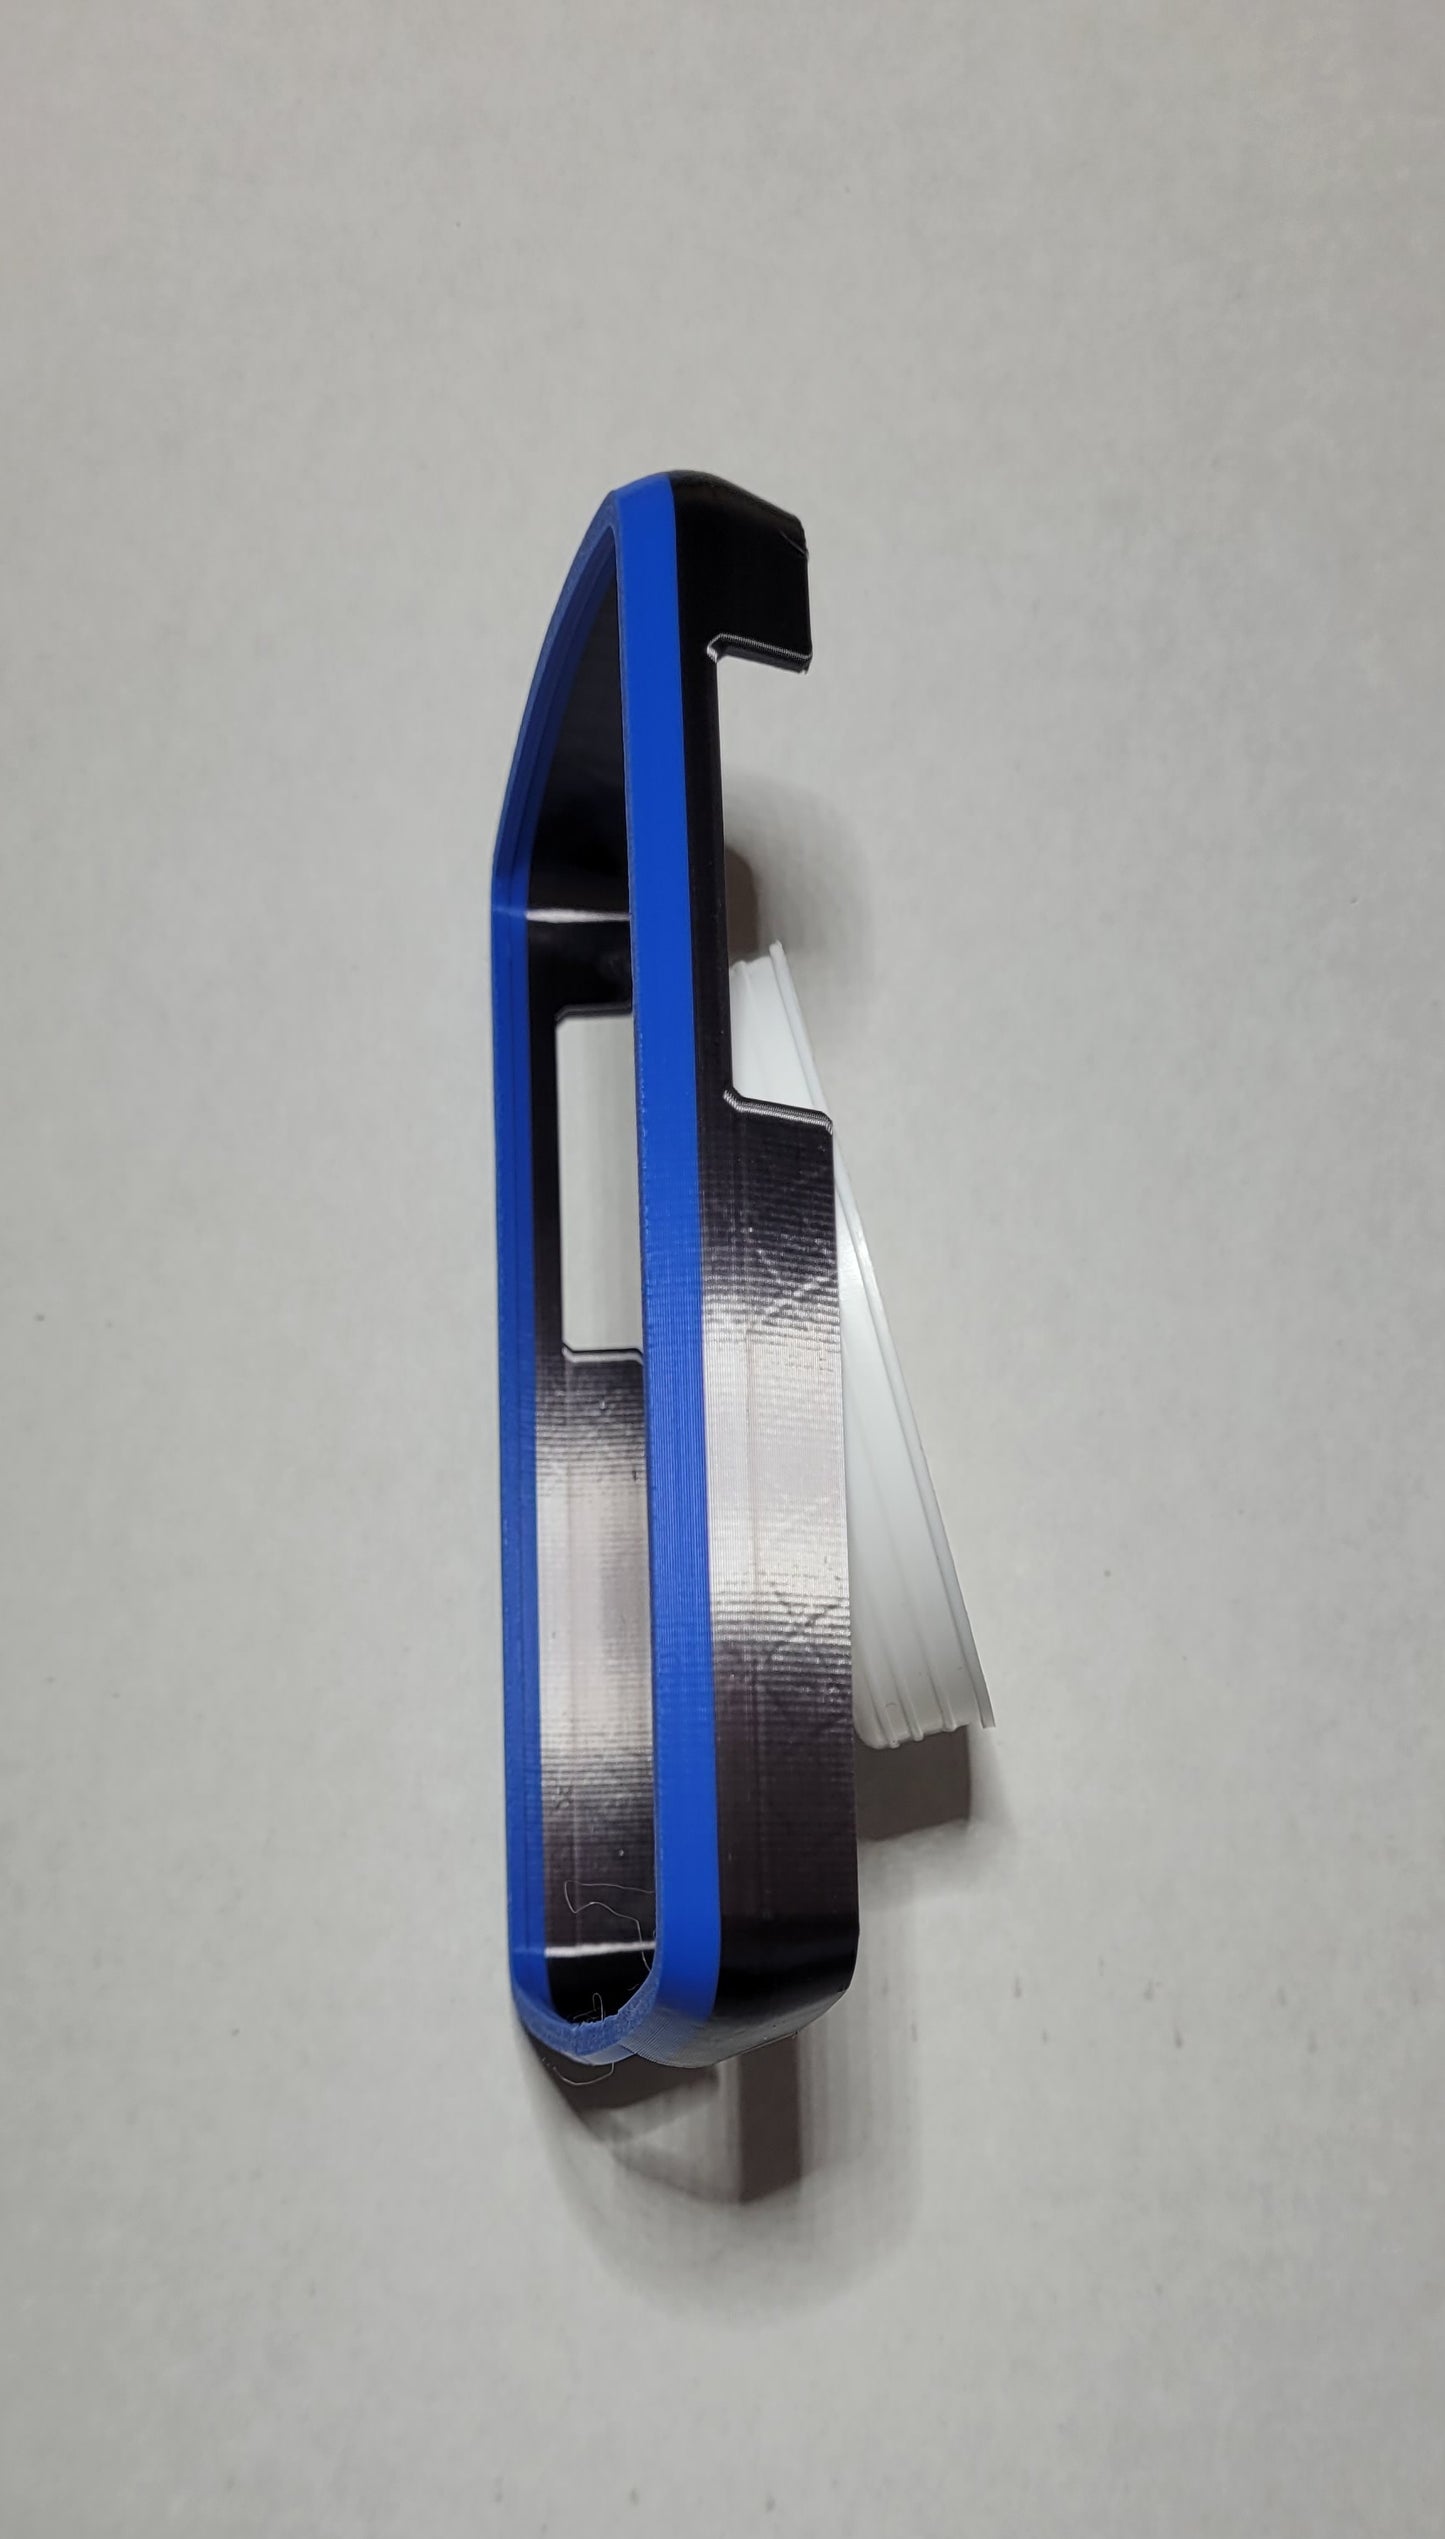 3d printed minelab protective cover blue & black